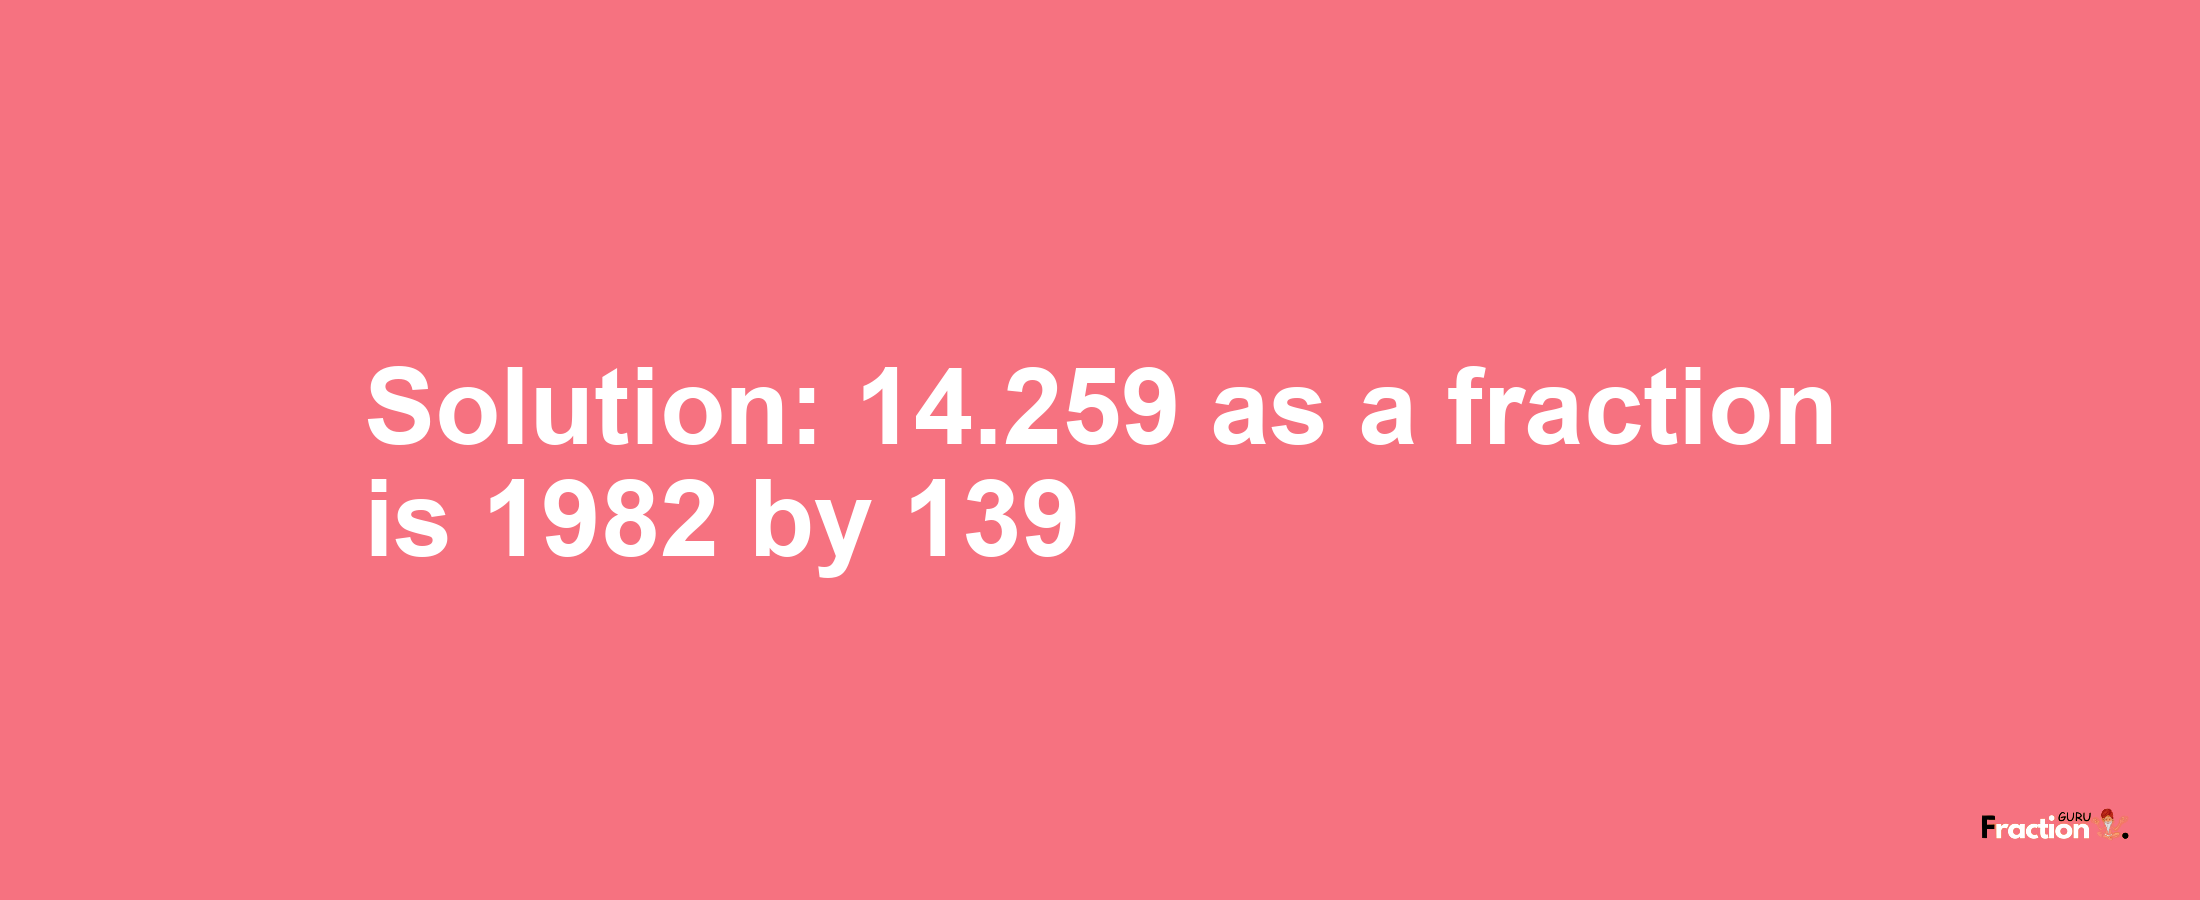 Solution:14.259 as a fraction is 1982/139